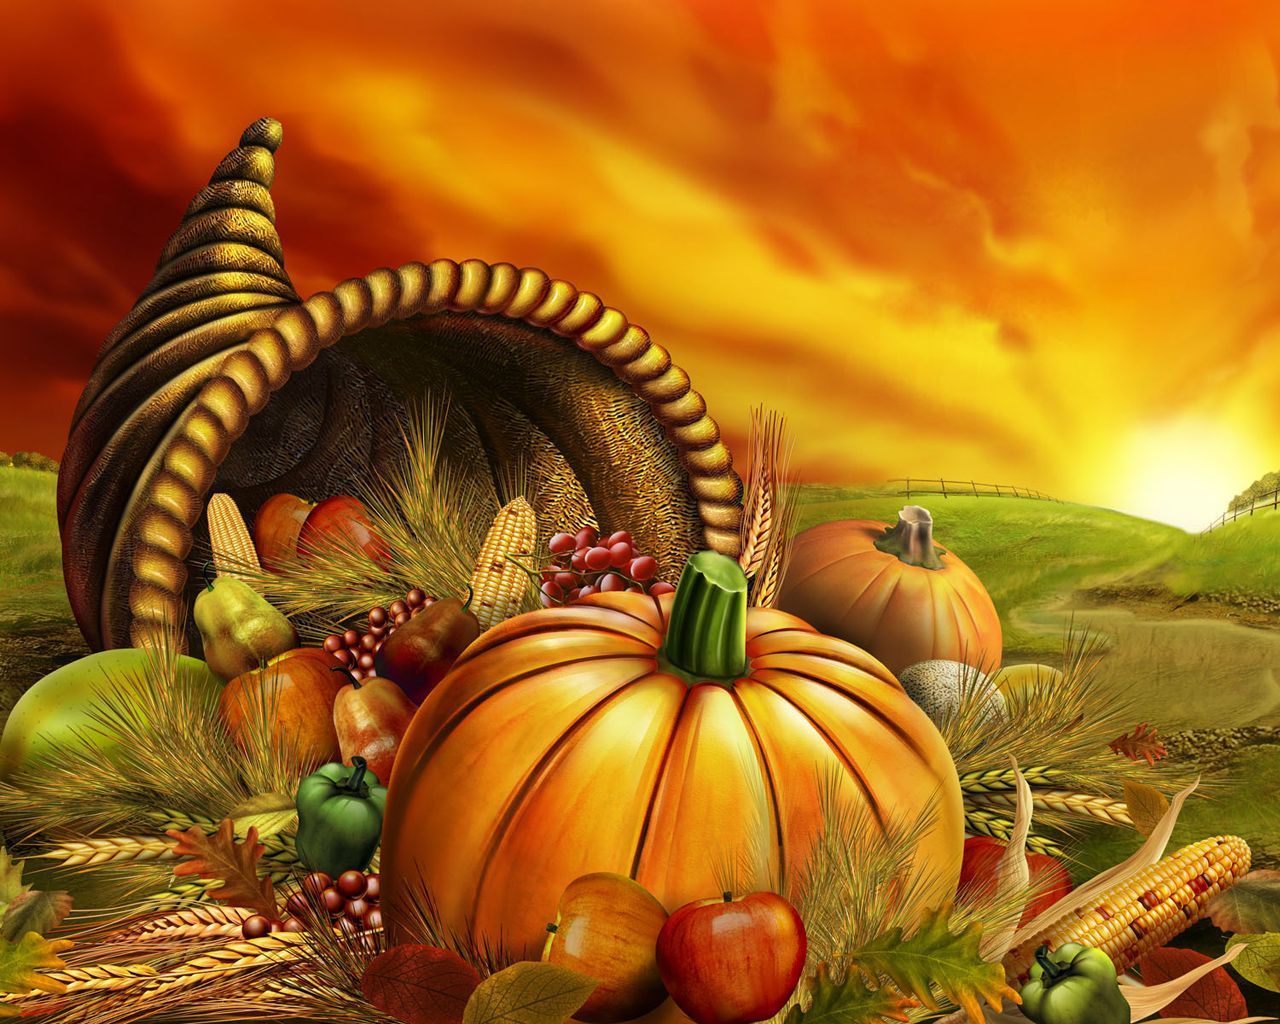 Autumn Landscapes ★ Wallpapers: colorful fall landscapes computer ...